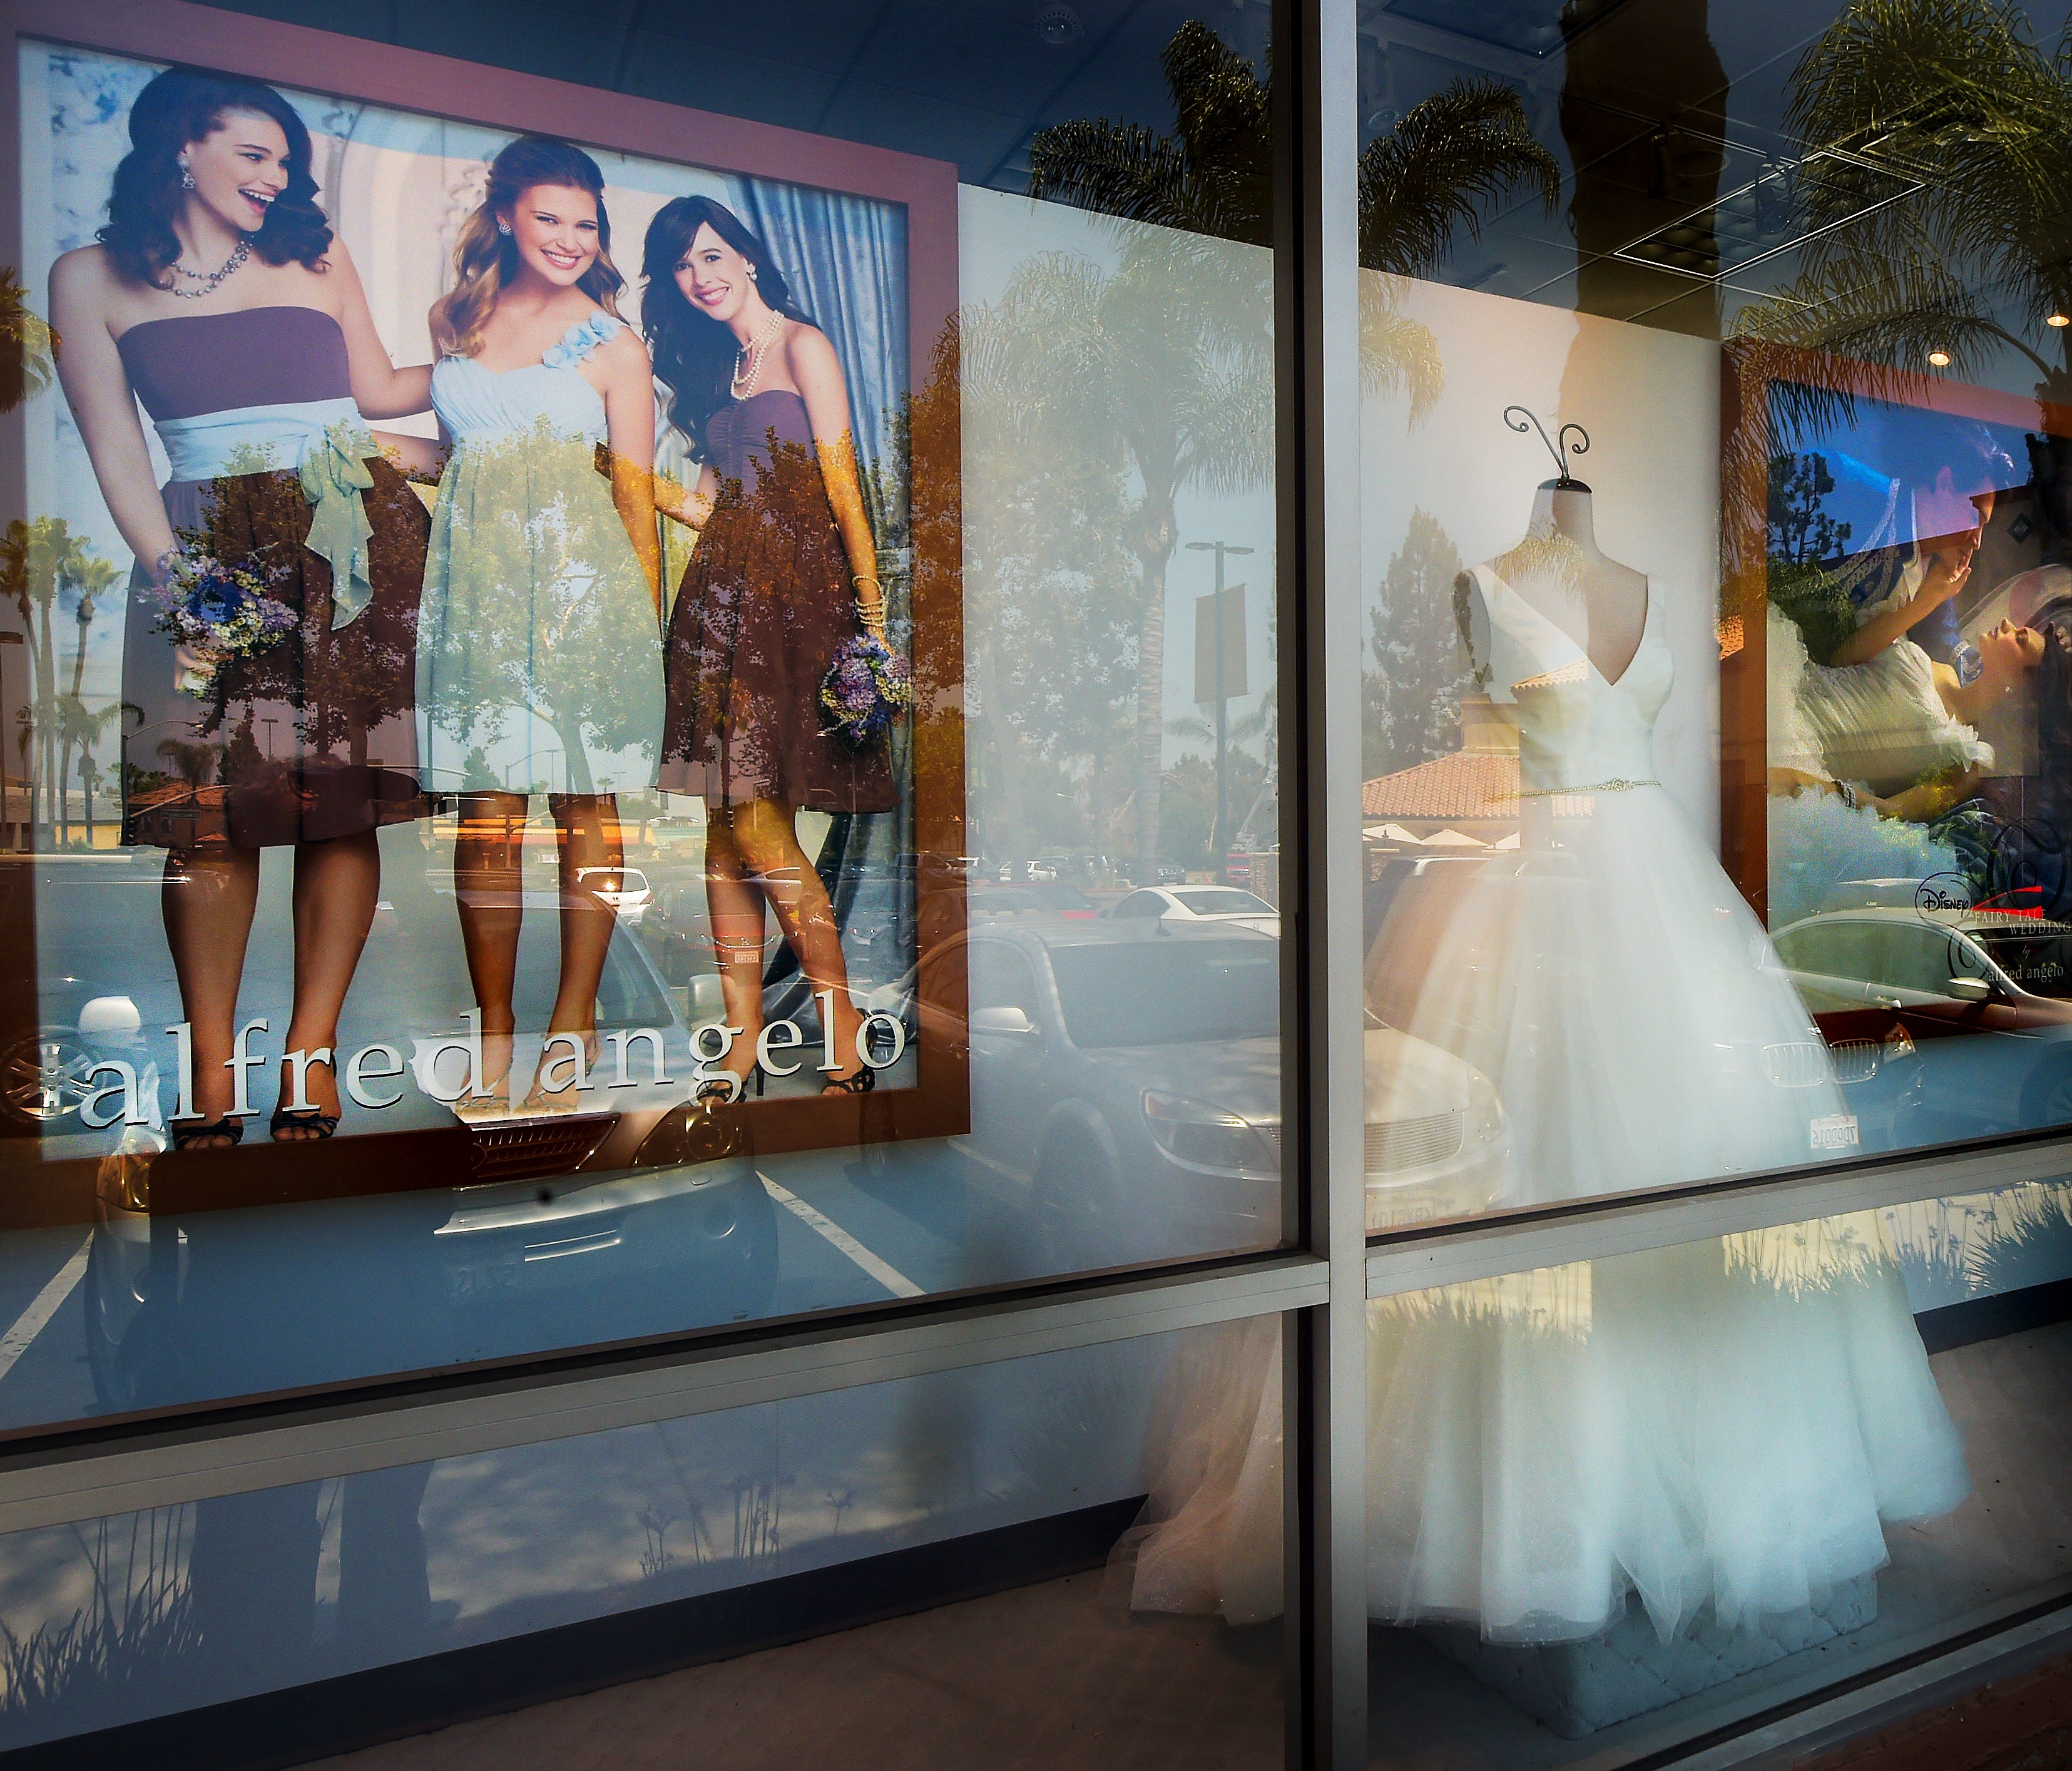 A window display is seen at Alfredo Angelo bridal store in West Covina, Calif., Friday, July 14, 2017. The wedding dress retailer declared bankruptcy late Thursday, July 13, and suddenly shut down all of its stores, leaving customers without answers 